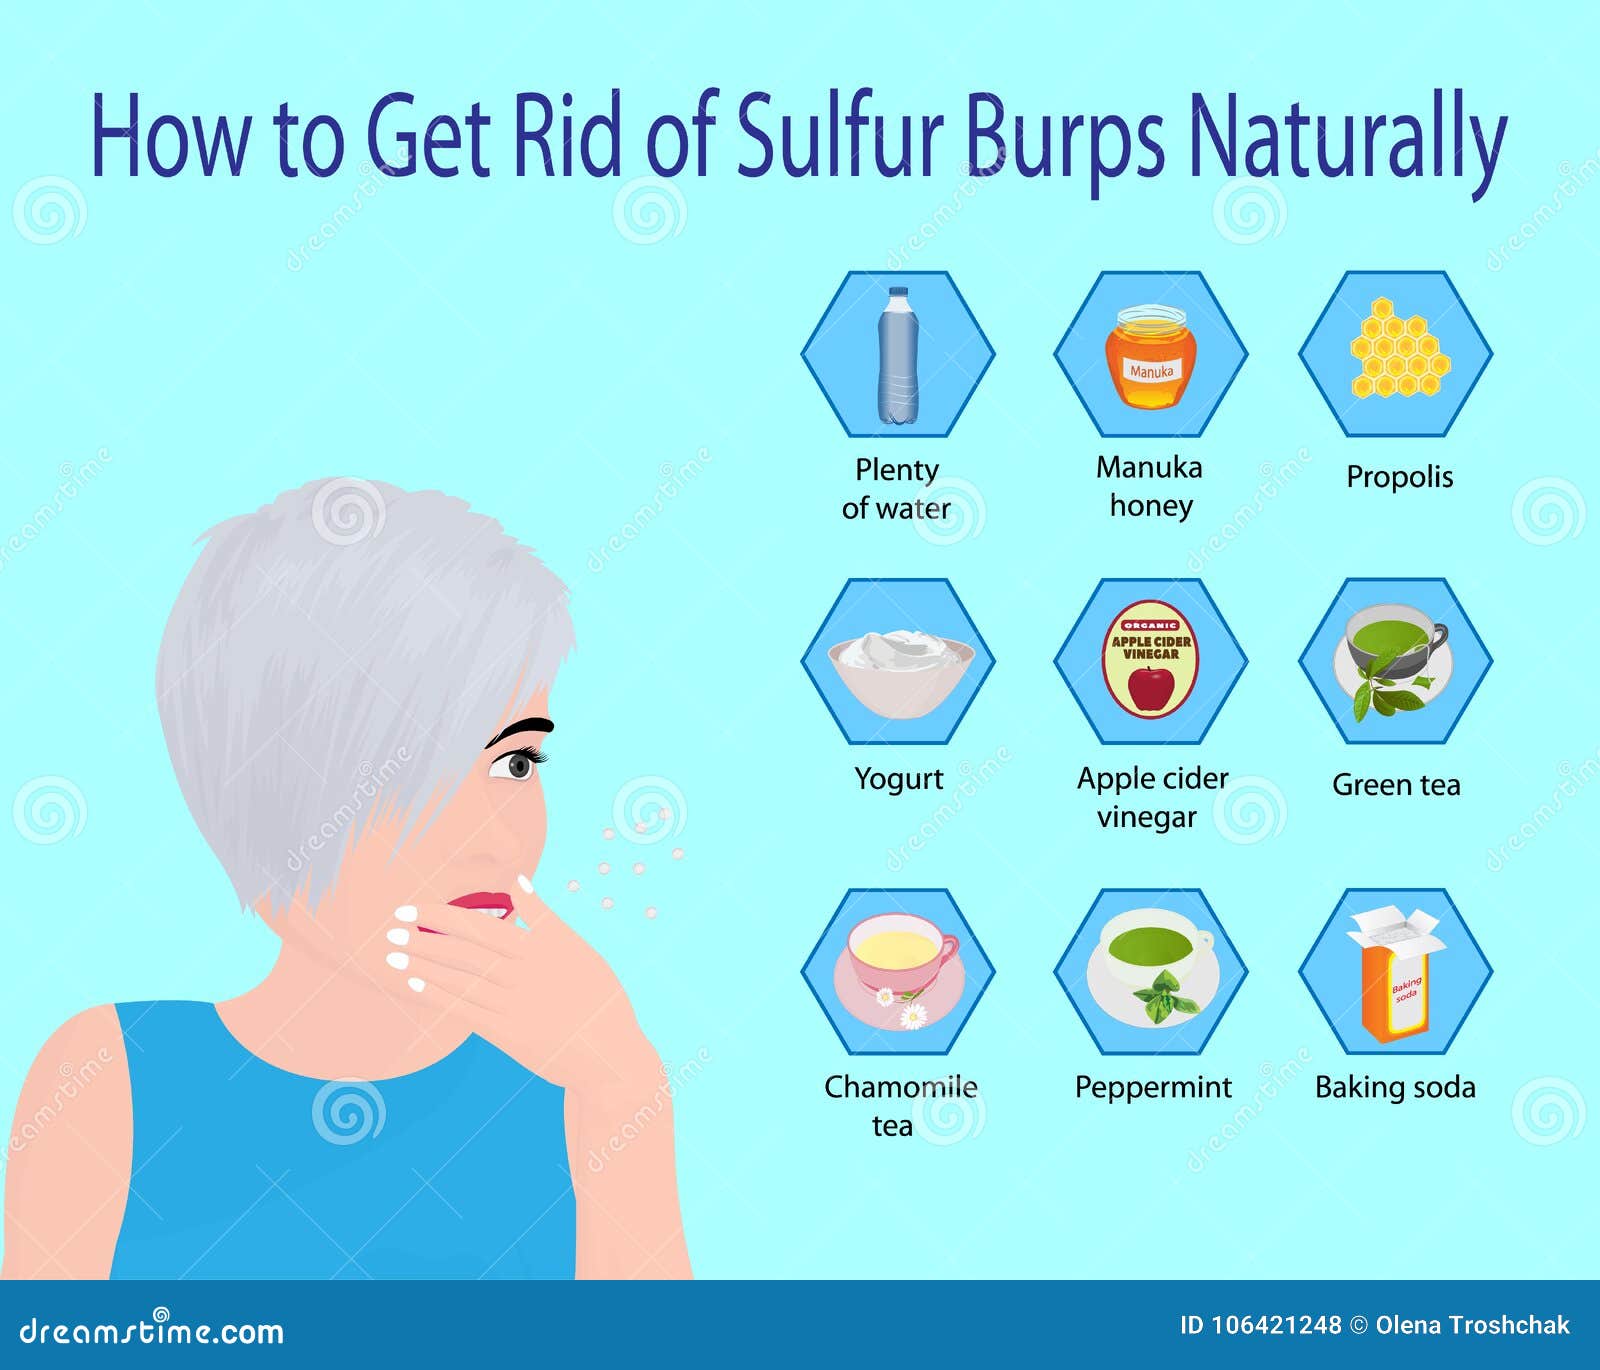 All 102+ Images how to get rid of sulfur burps quickly Completed